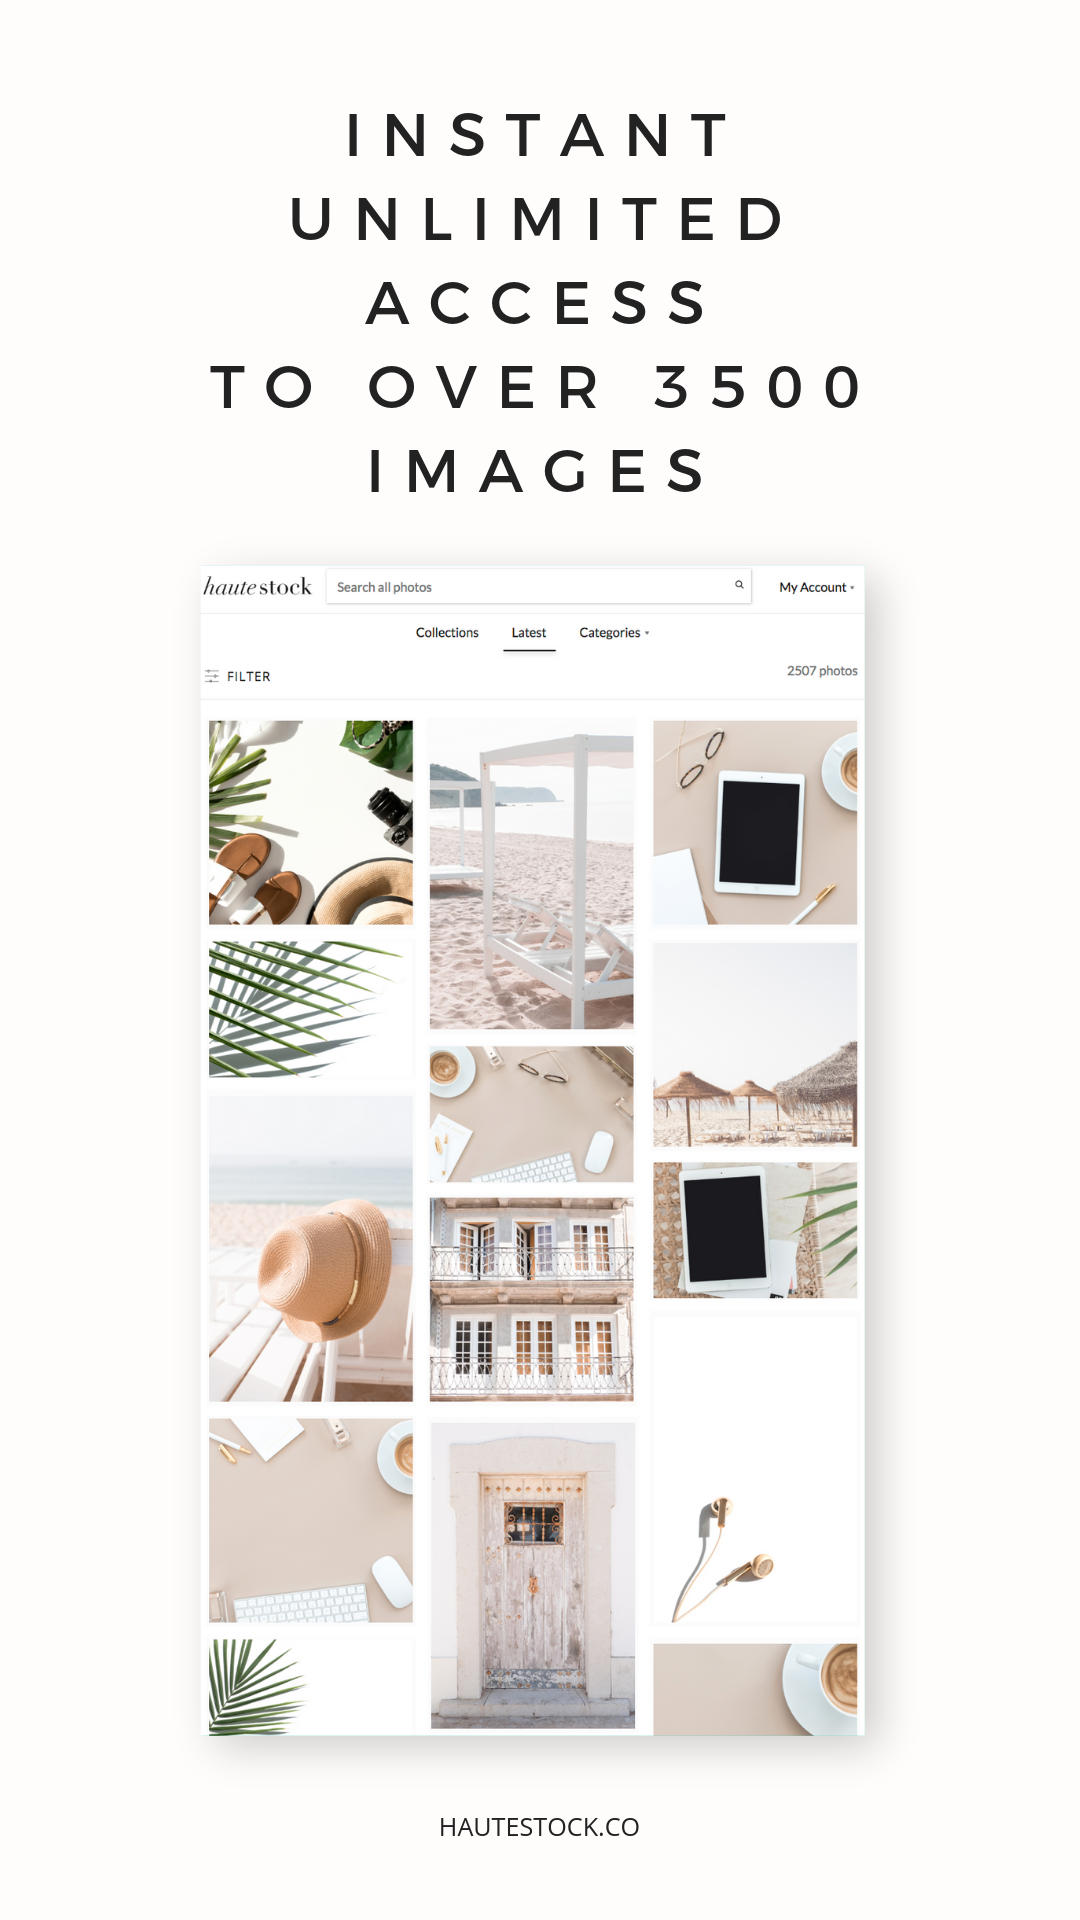 A Haute Stock membership is the most affordable way to get high-quality, stylish stock photos and beautiful imagery for your business, blog and brand. You get instant, unlimited access to over 2500 images, with new images added every week! Click to …